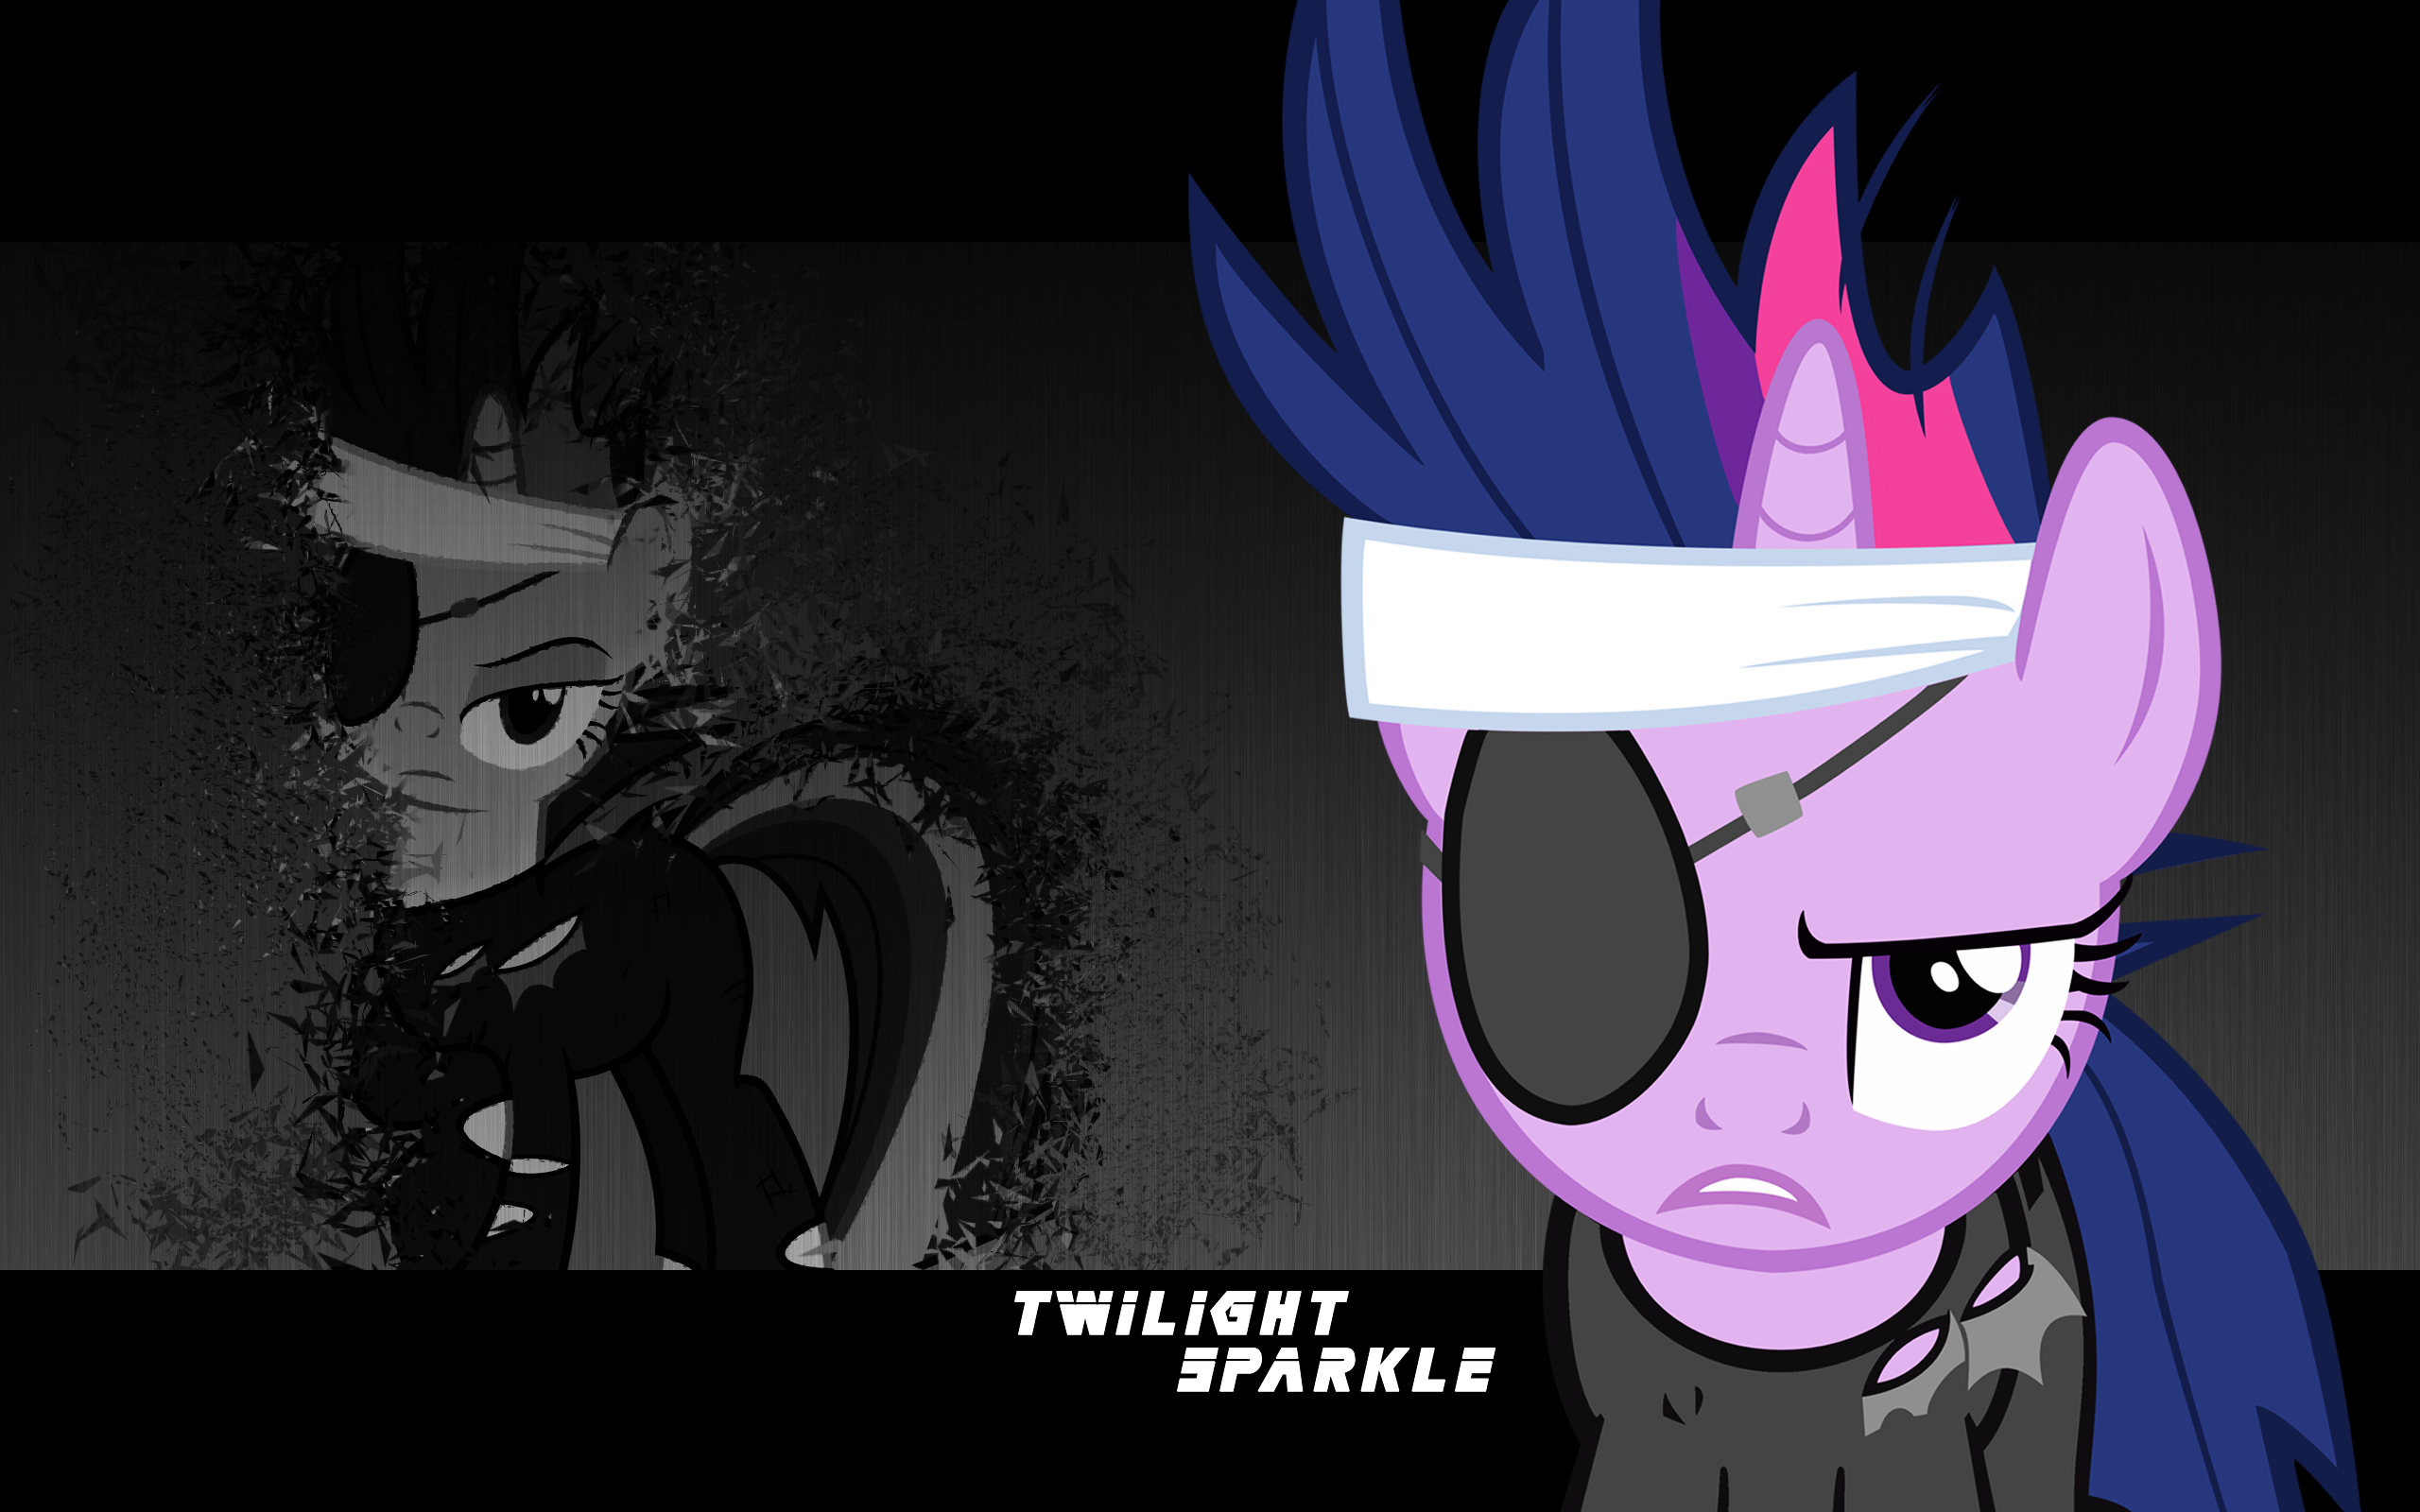 Mgs: Metal gear Sparkle by JAVE-the-13, mehoep and ZuTheSkunk